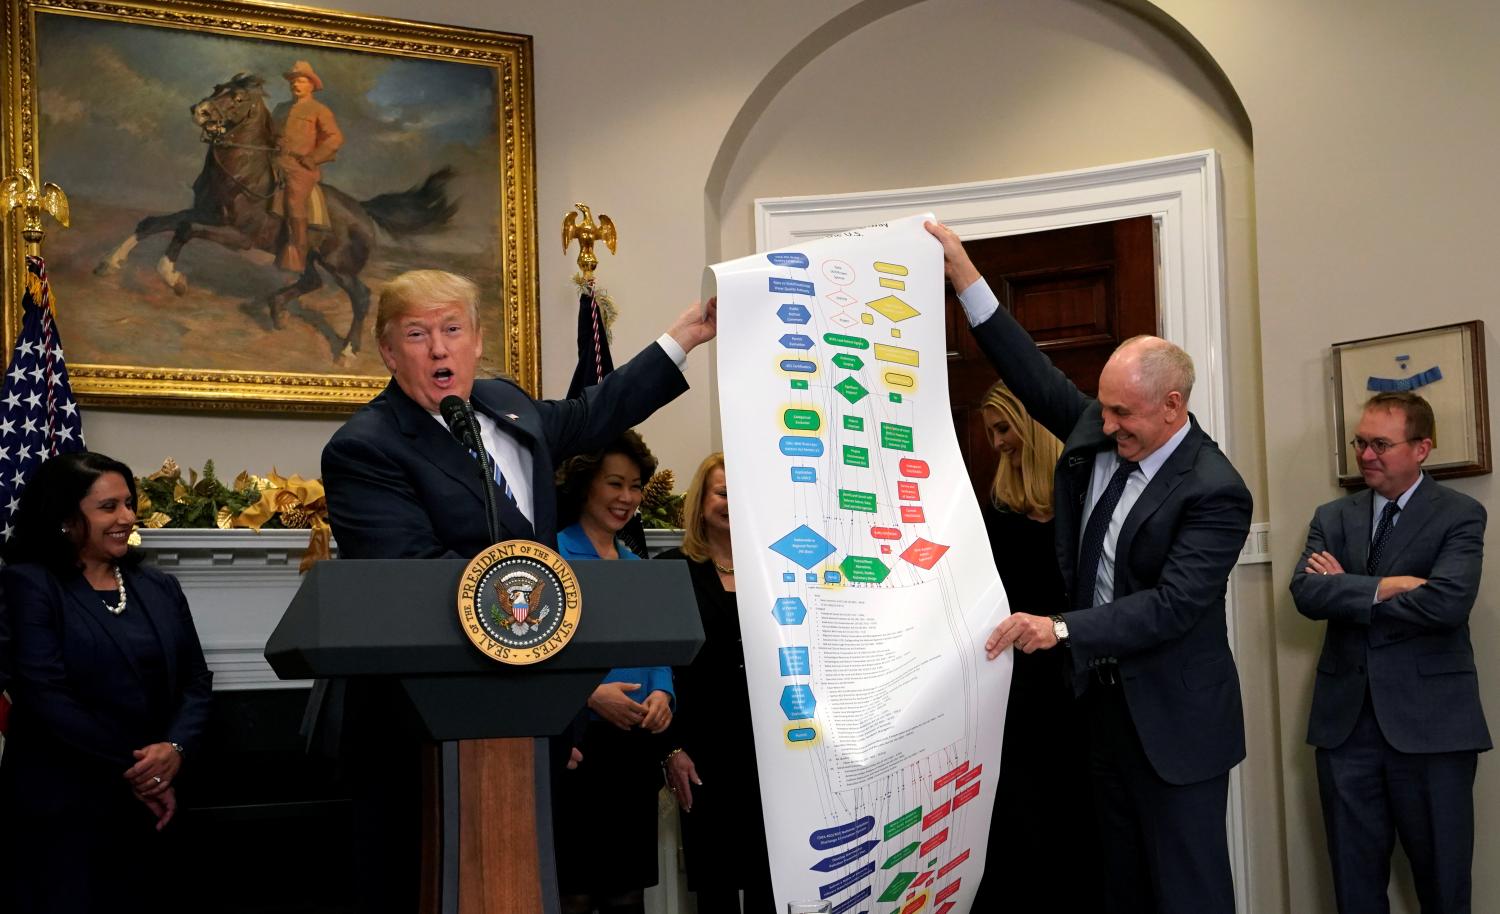 U.S. President Donald Trump and Assistant to the President for Strategic Initiatives Chris Liddell hold up a chart showing the processes involved with making a federal highway during an event on deregulation at the White House in Washington, U.S., December 14, 2017. REUTERS/Kevin Lamarque - RC14B0BBE380